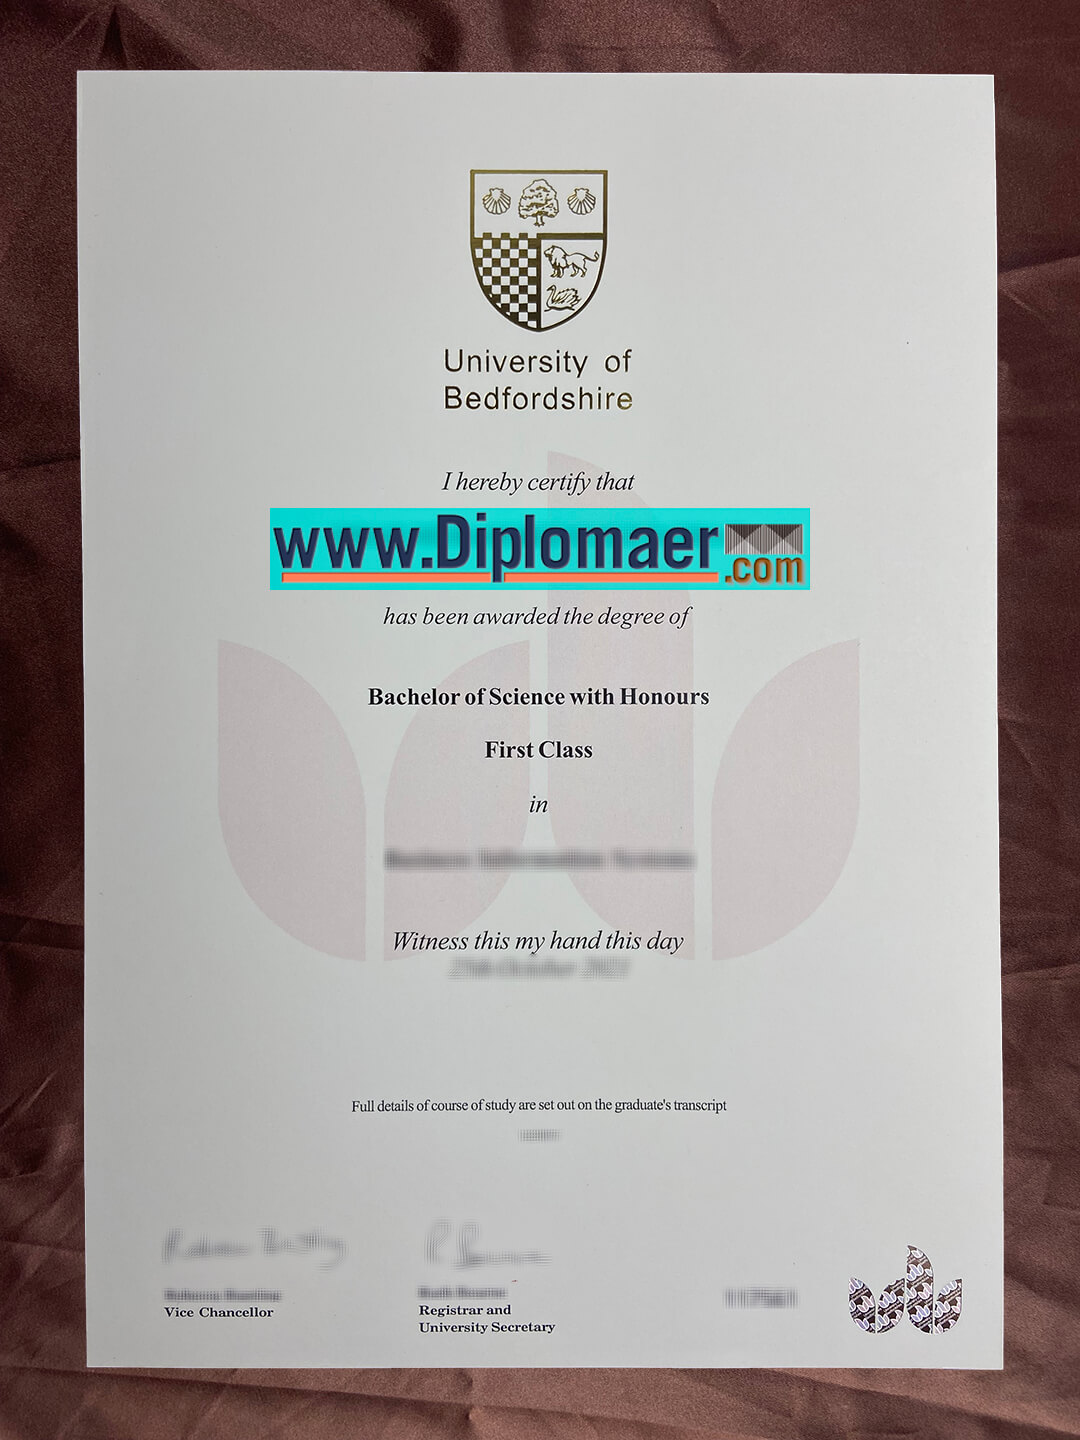 University of Bedfordshire fake diploma - How to make the realistic University of Bedfordshire degree certificate?